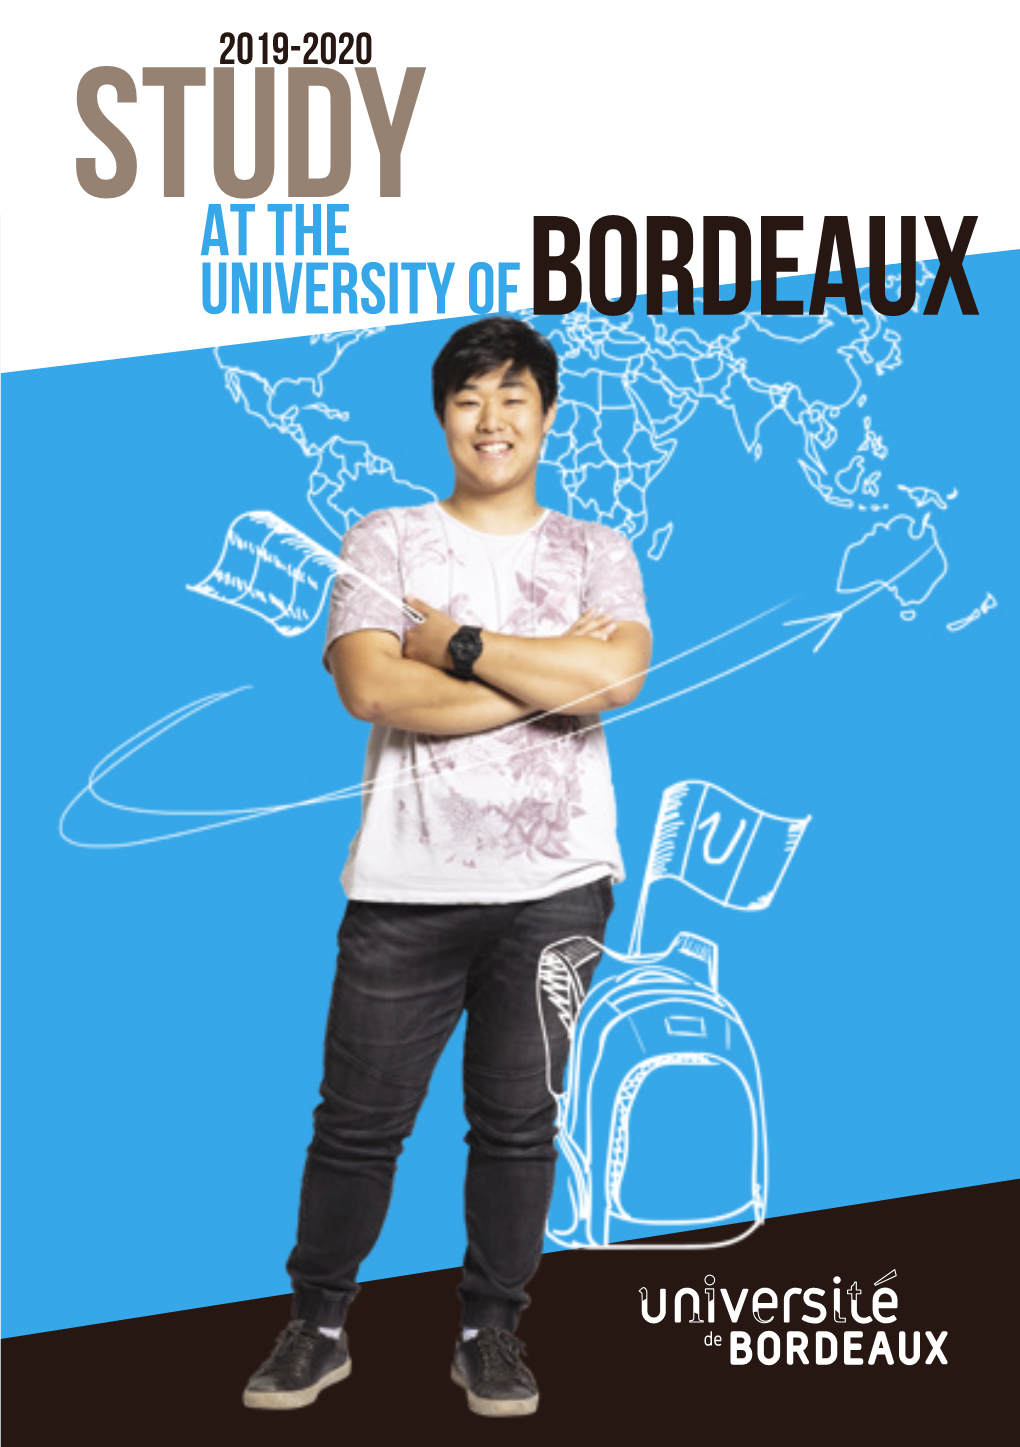 BORDEAUX University ↘ of Bordeaux 7,200 International Students 700 Partner Universities 2,000 Based in Over 80 56,000 Phd Students Countries Worlwide Students